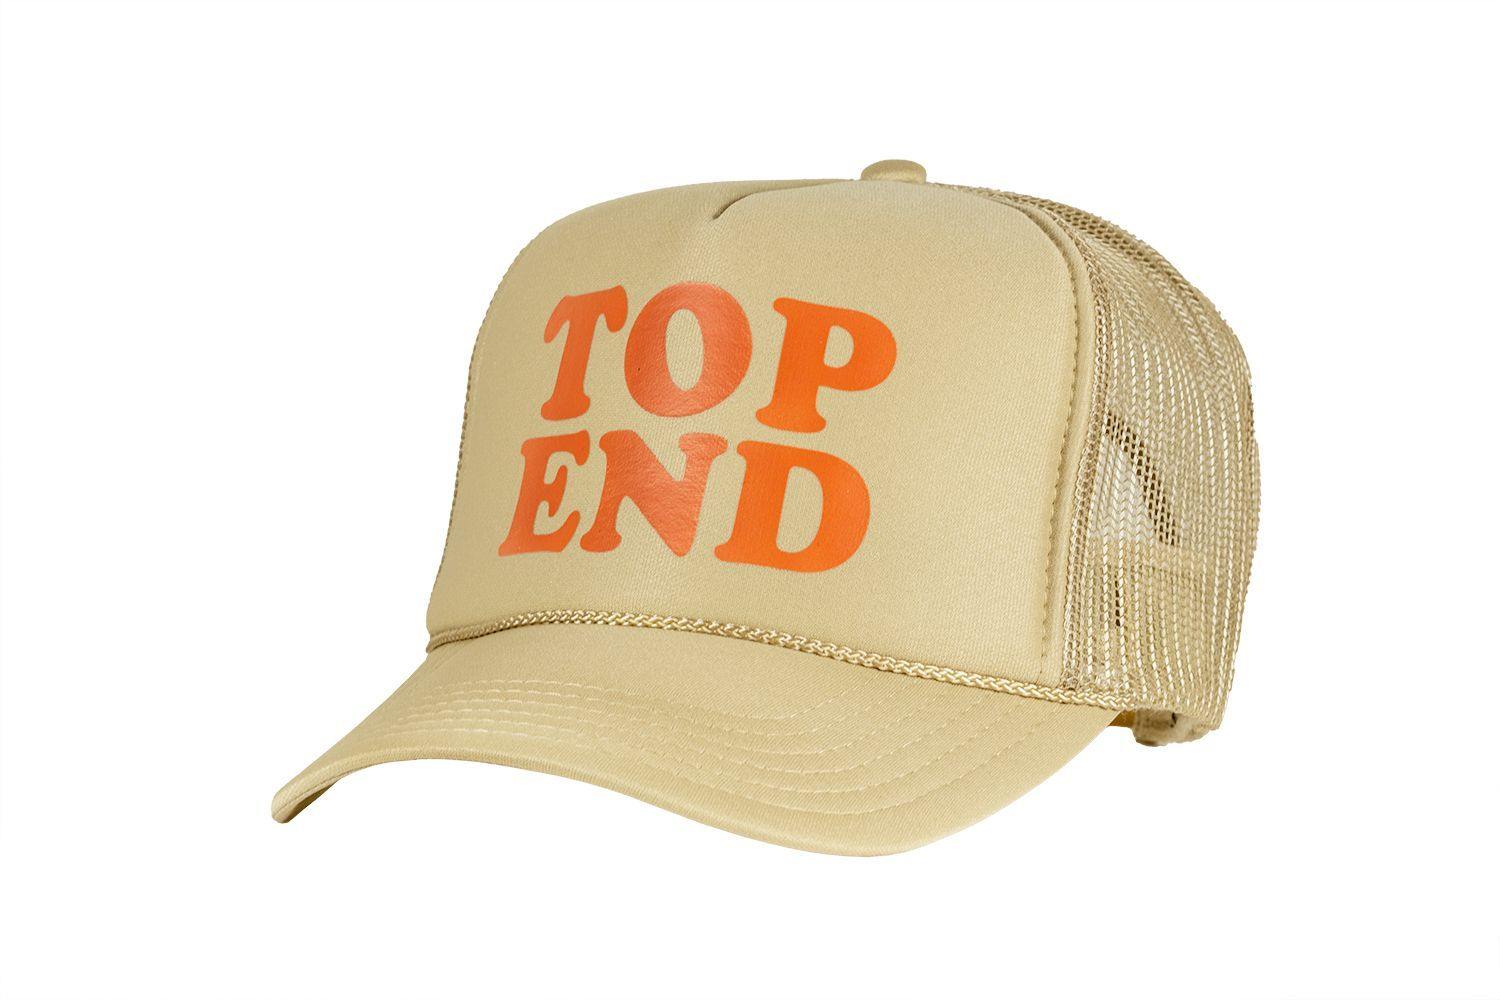 Northern Territory Top End high crown trucker cap with mesh back and snapback - Tropic Trucker Australia®